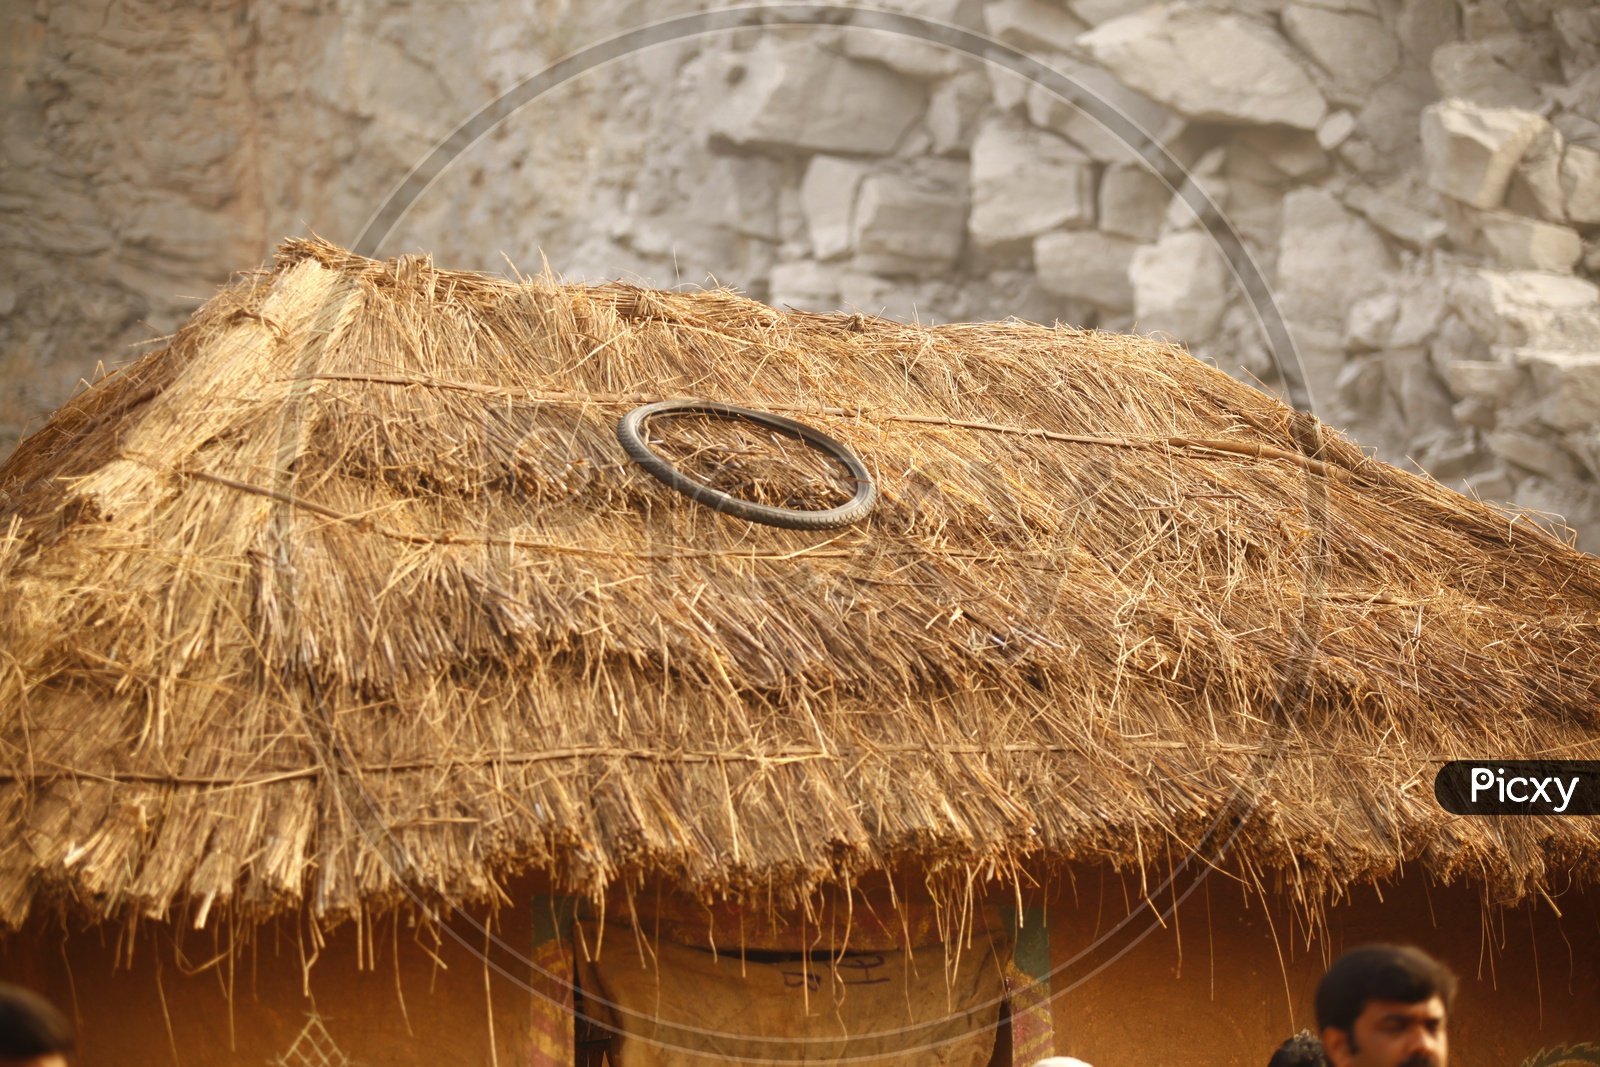 A tyre on a thatched roof